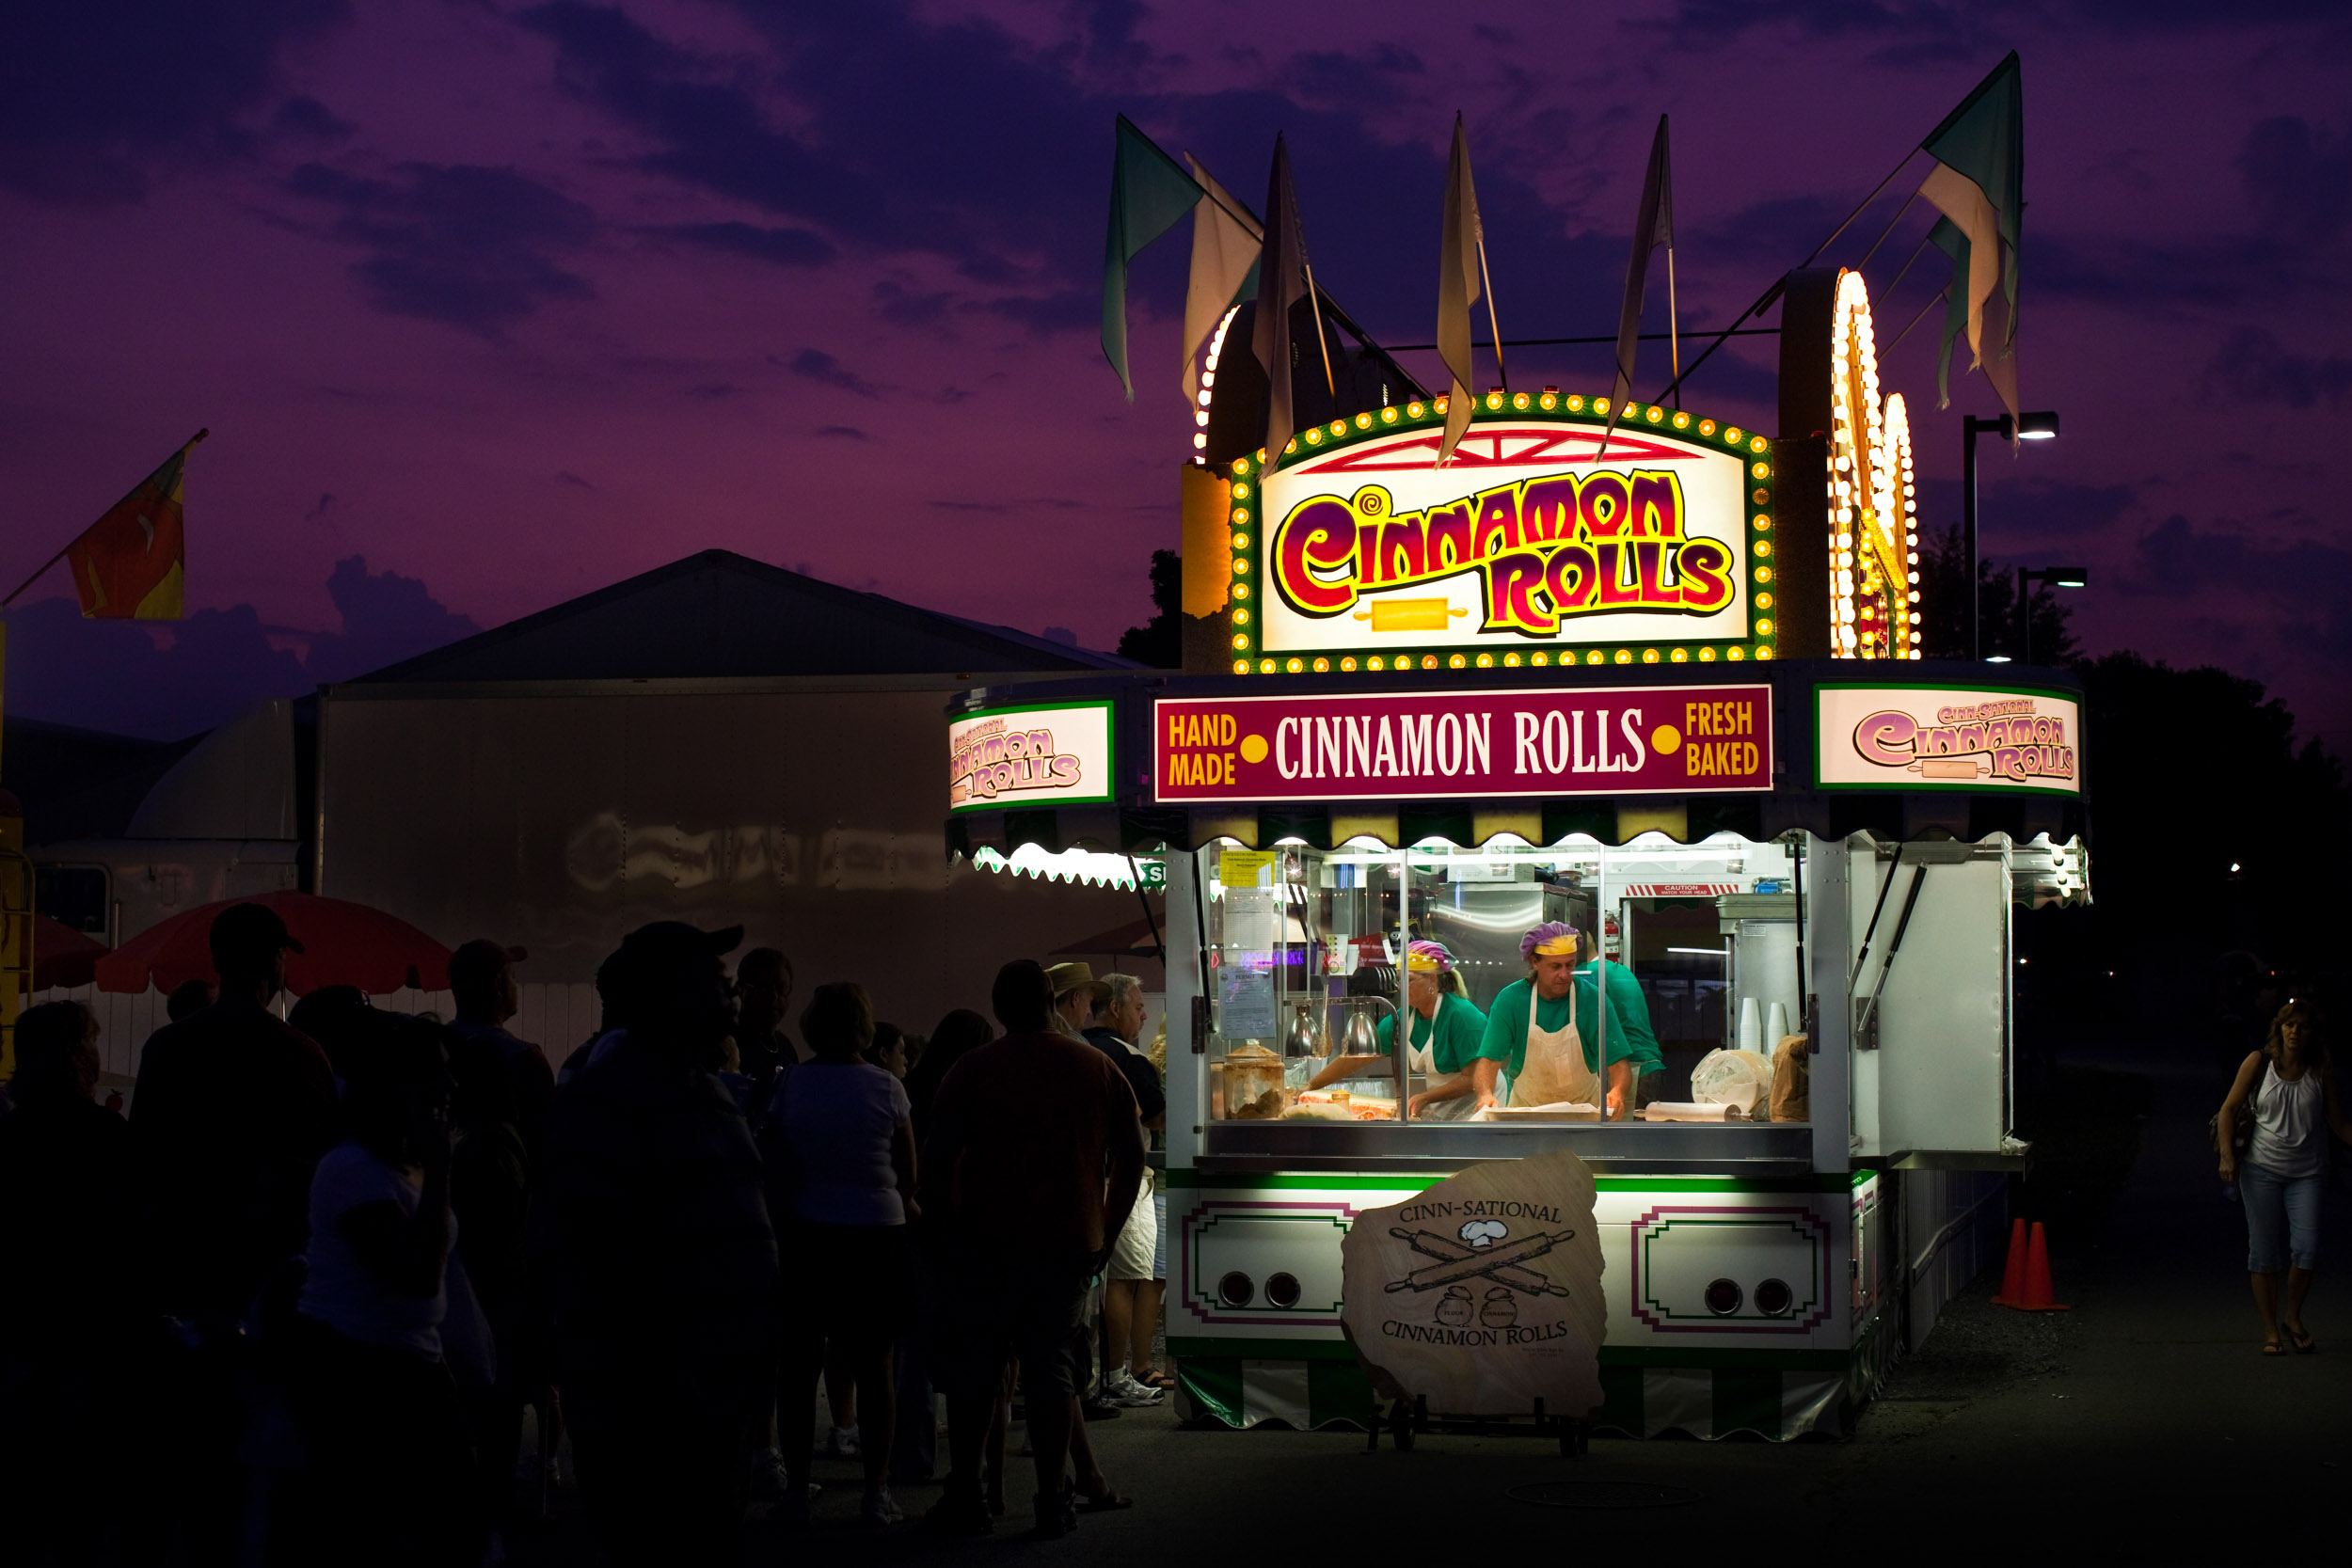 Patrons line up after dark for the Cinnamon Rolls cart